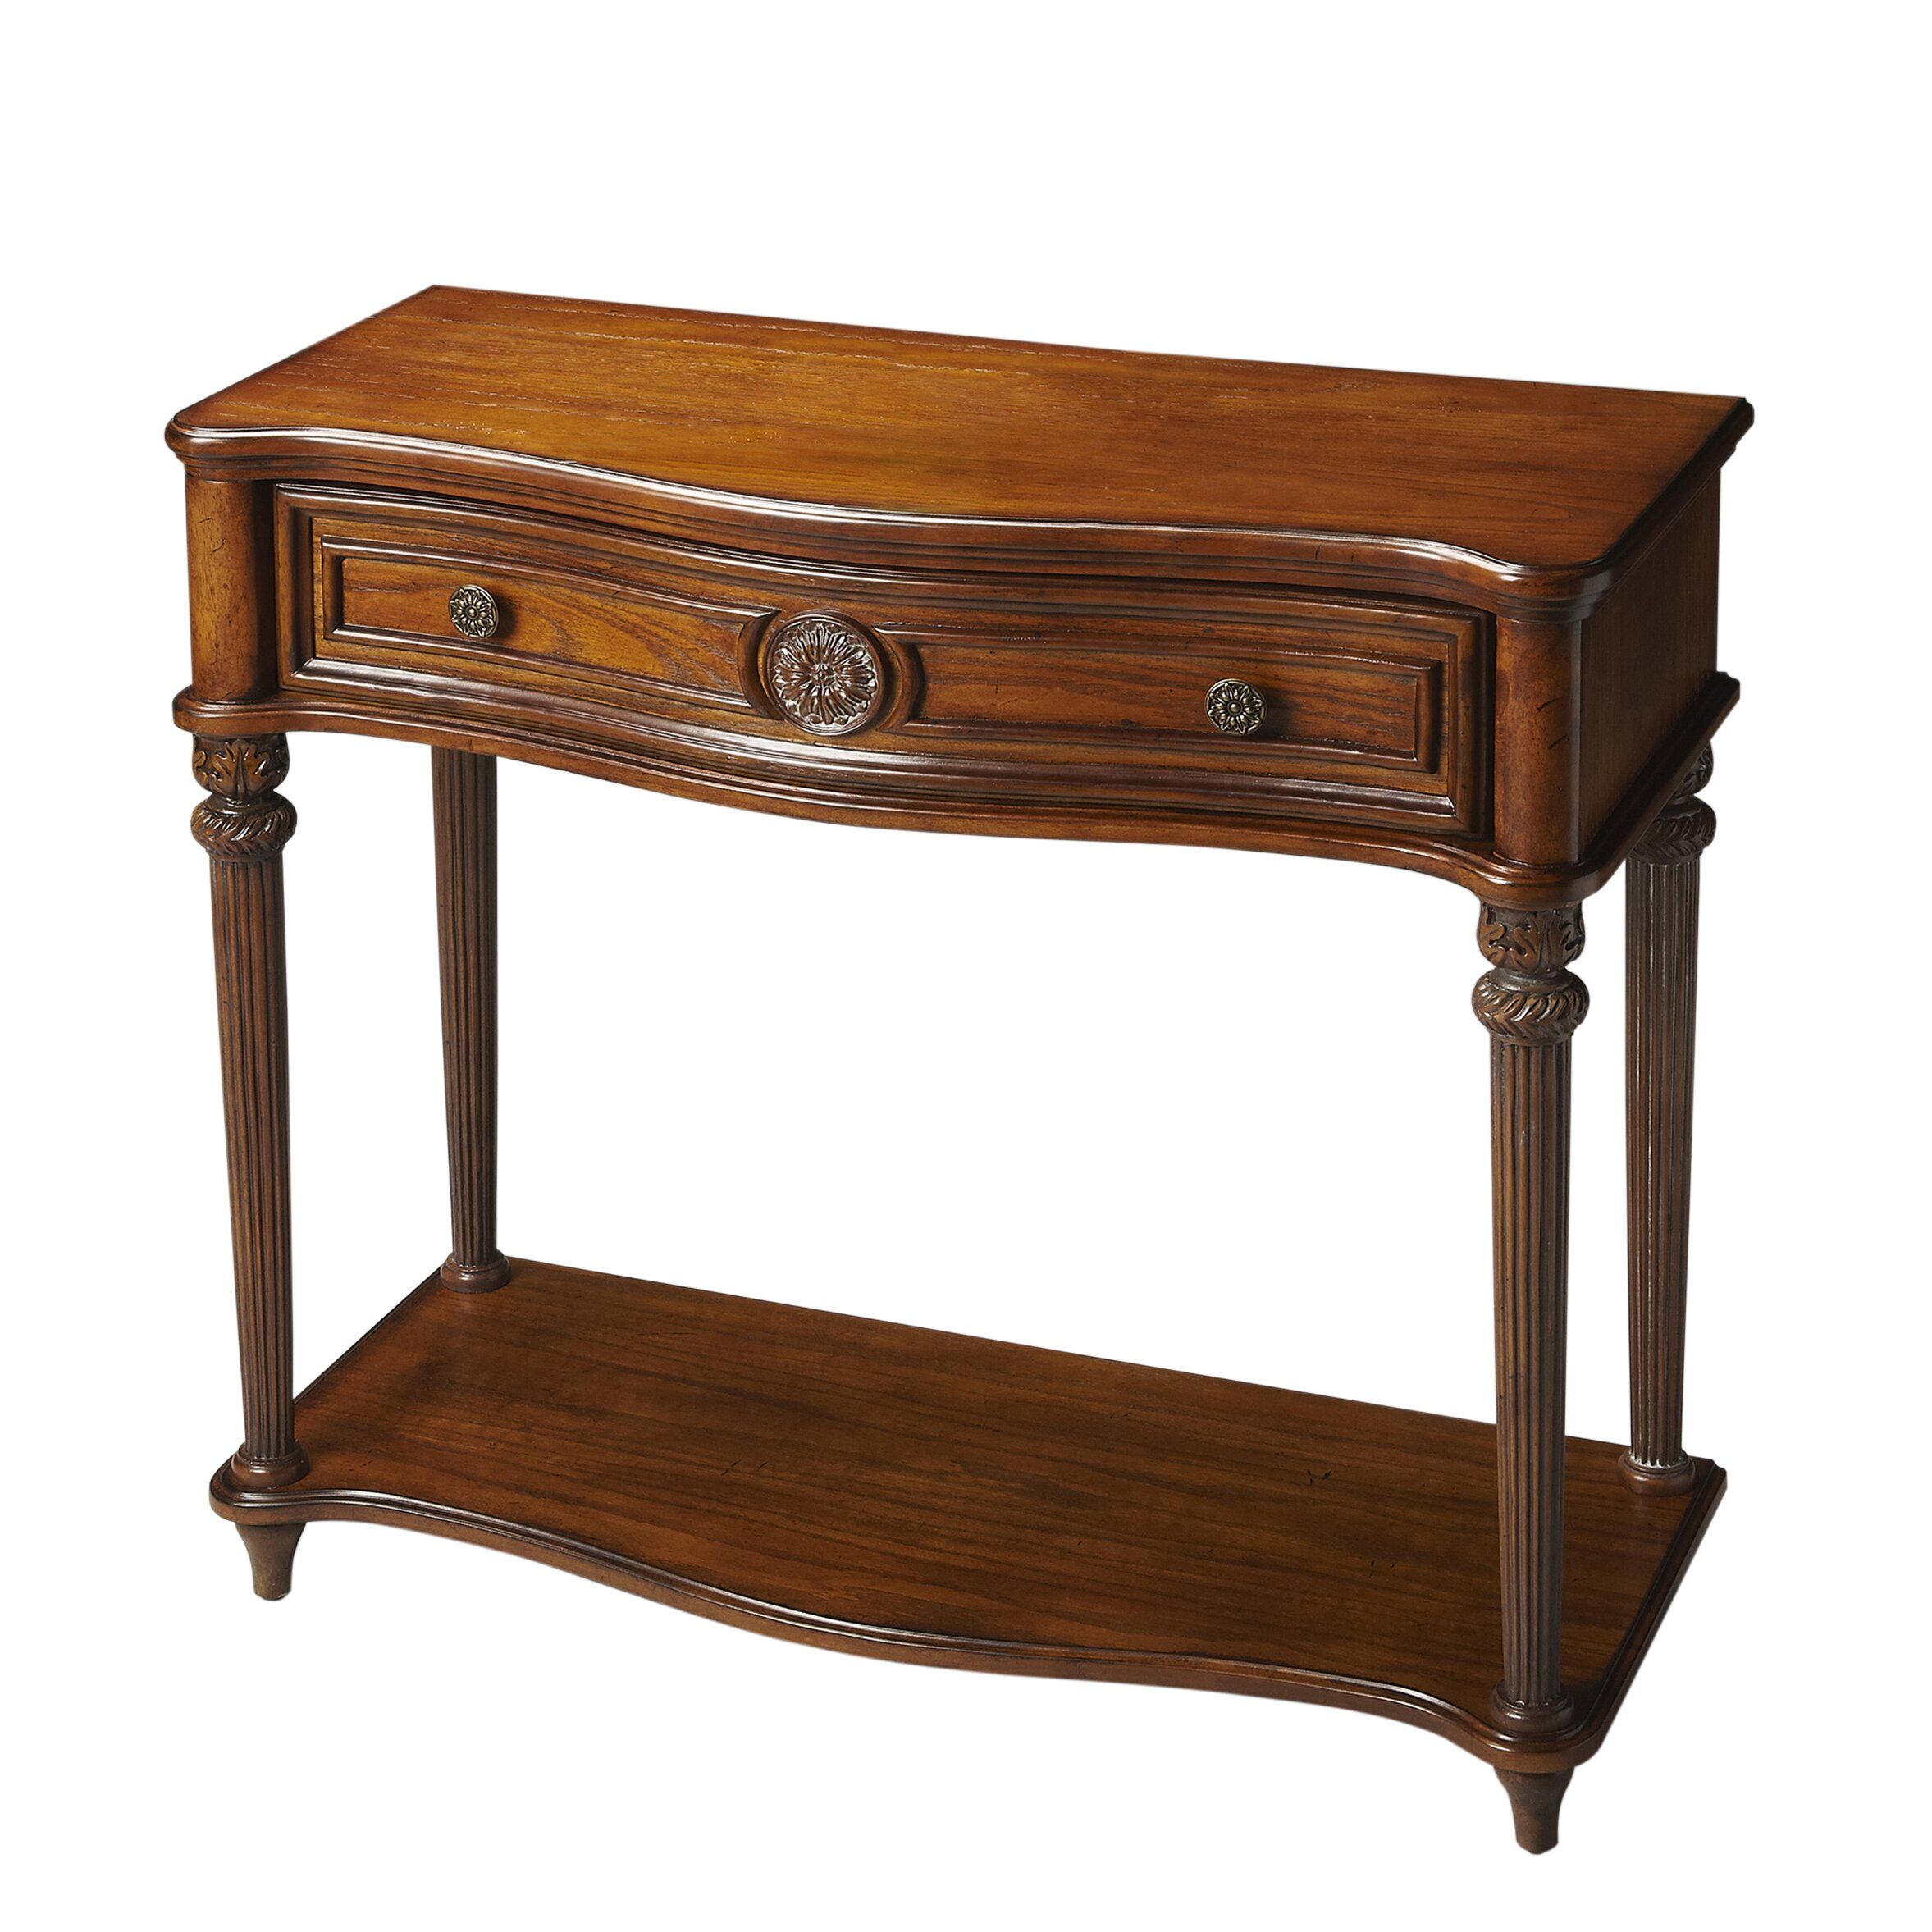 Butler Masterpiece Console Table In Distressed Vintage Oak & Reviews Intended For Antique Console Tables (View 3 of 20)